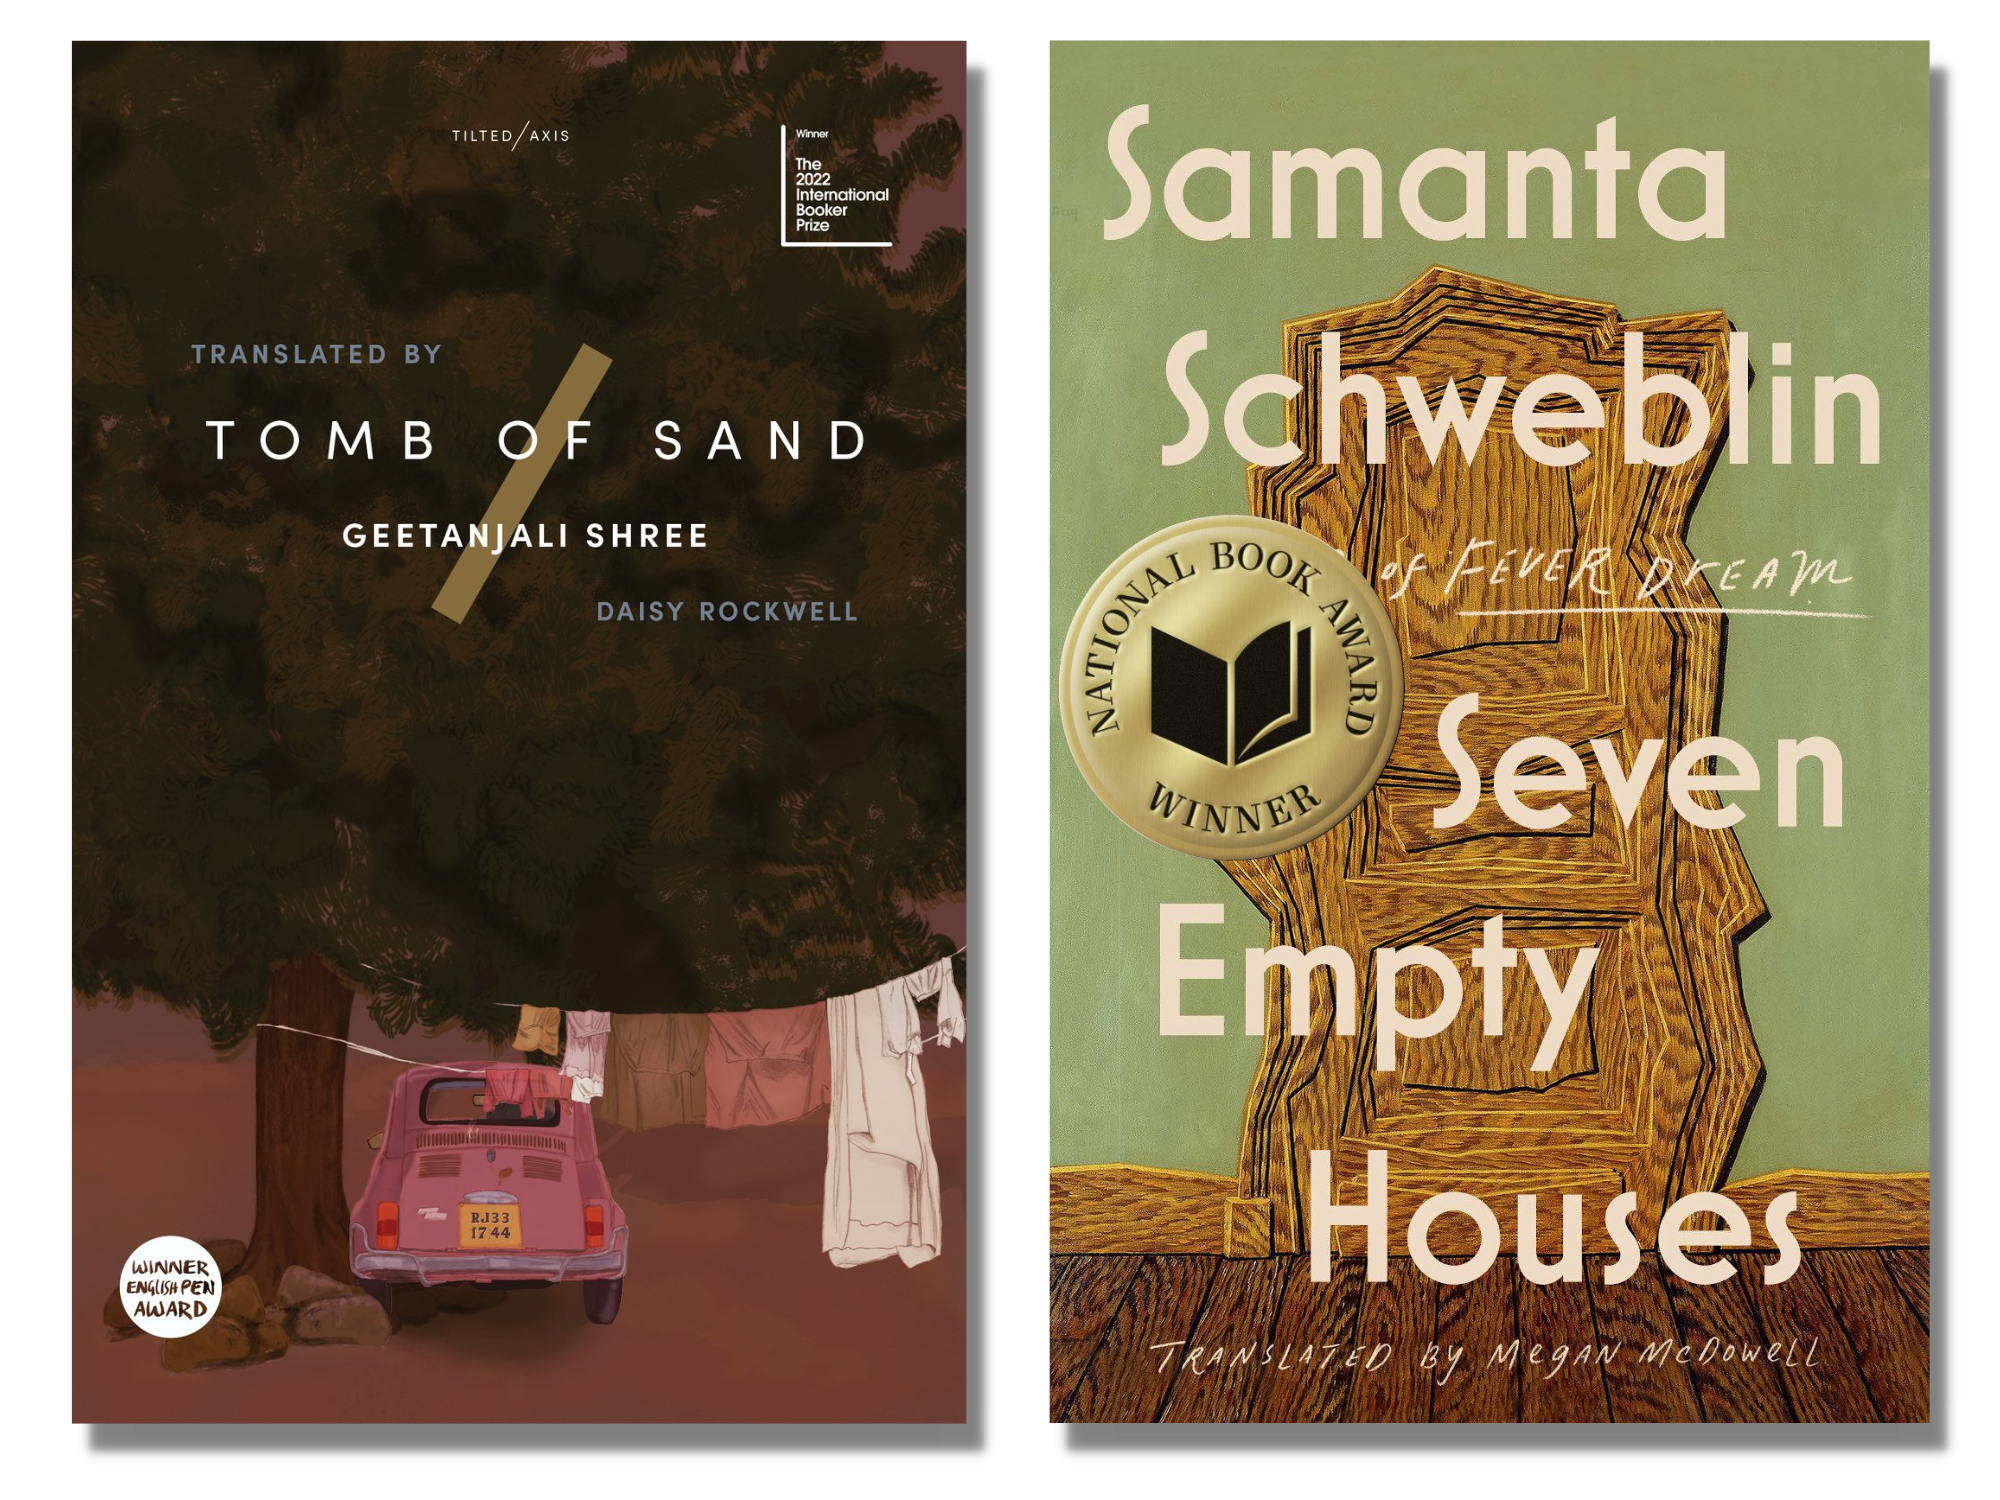 The covers of "Tomb of Sand" and "Seven Empty Houses"